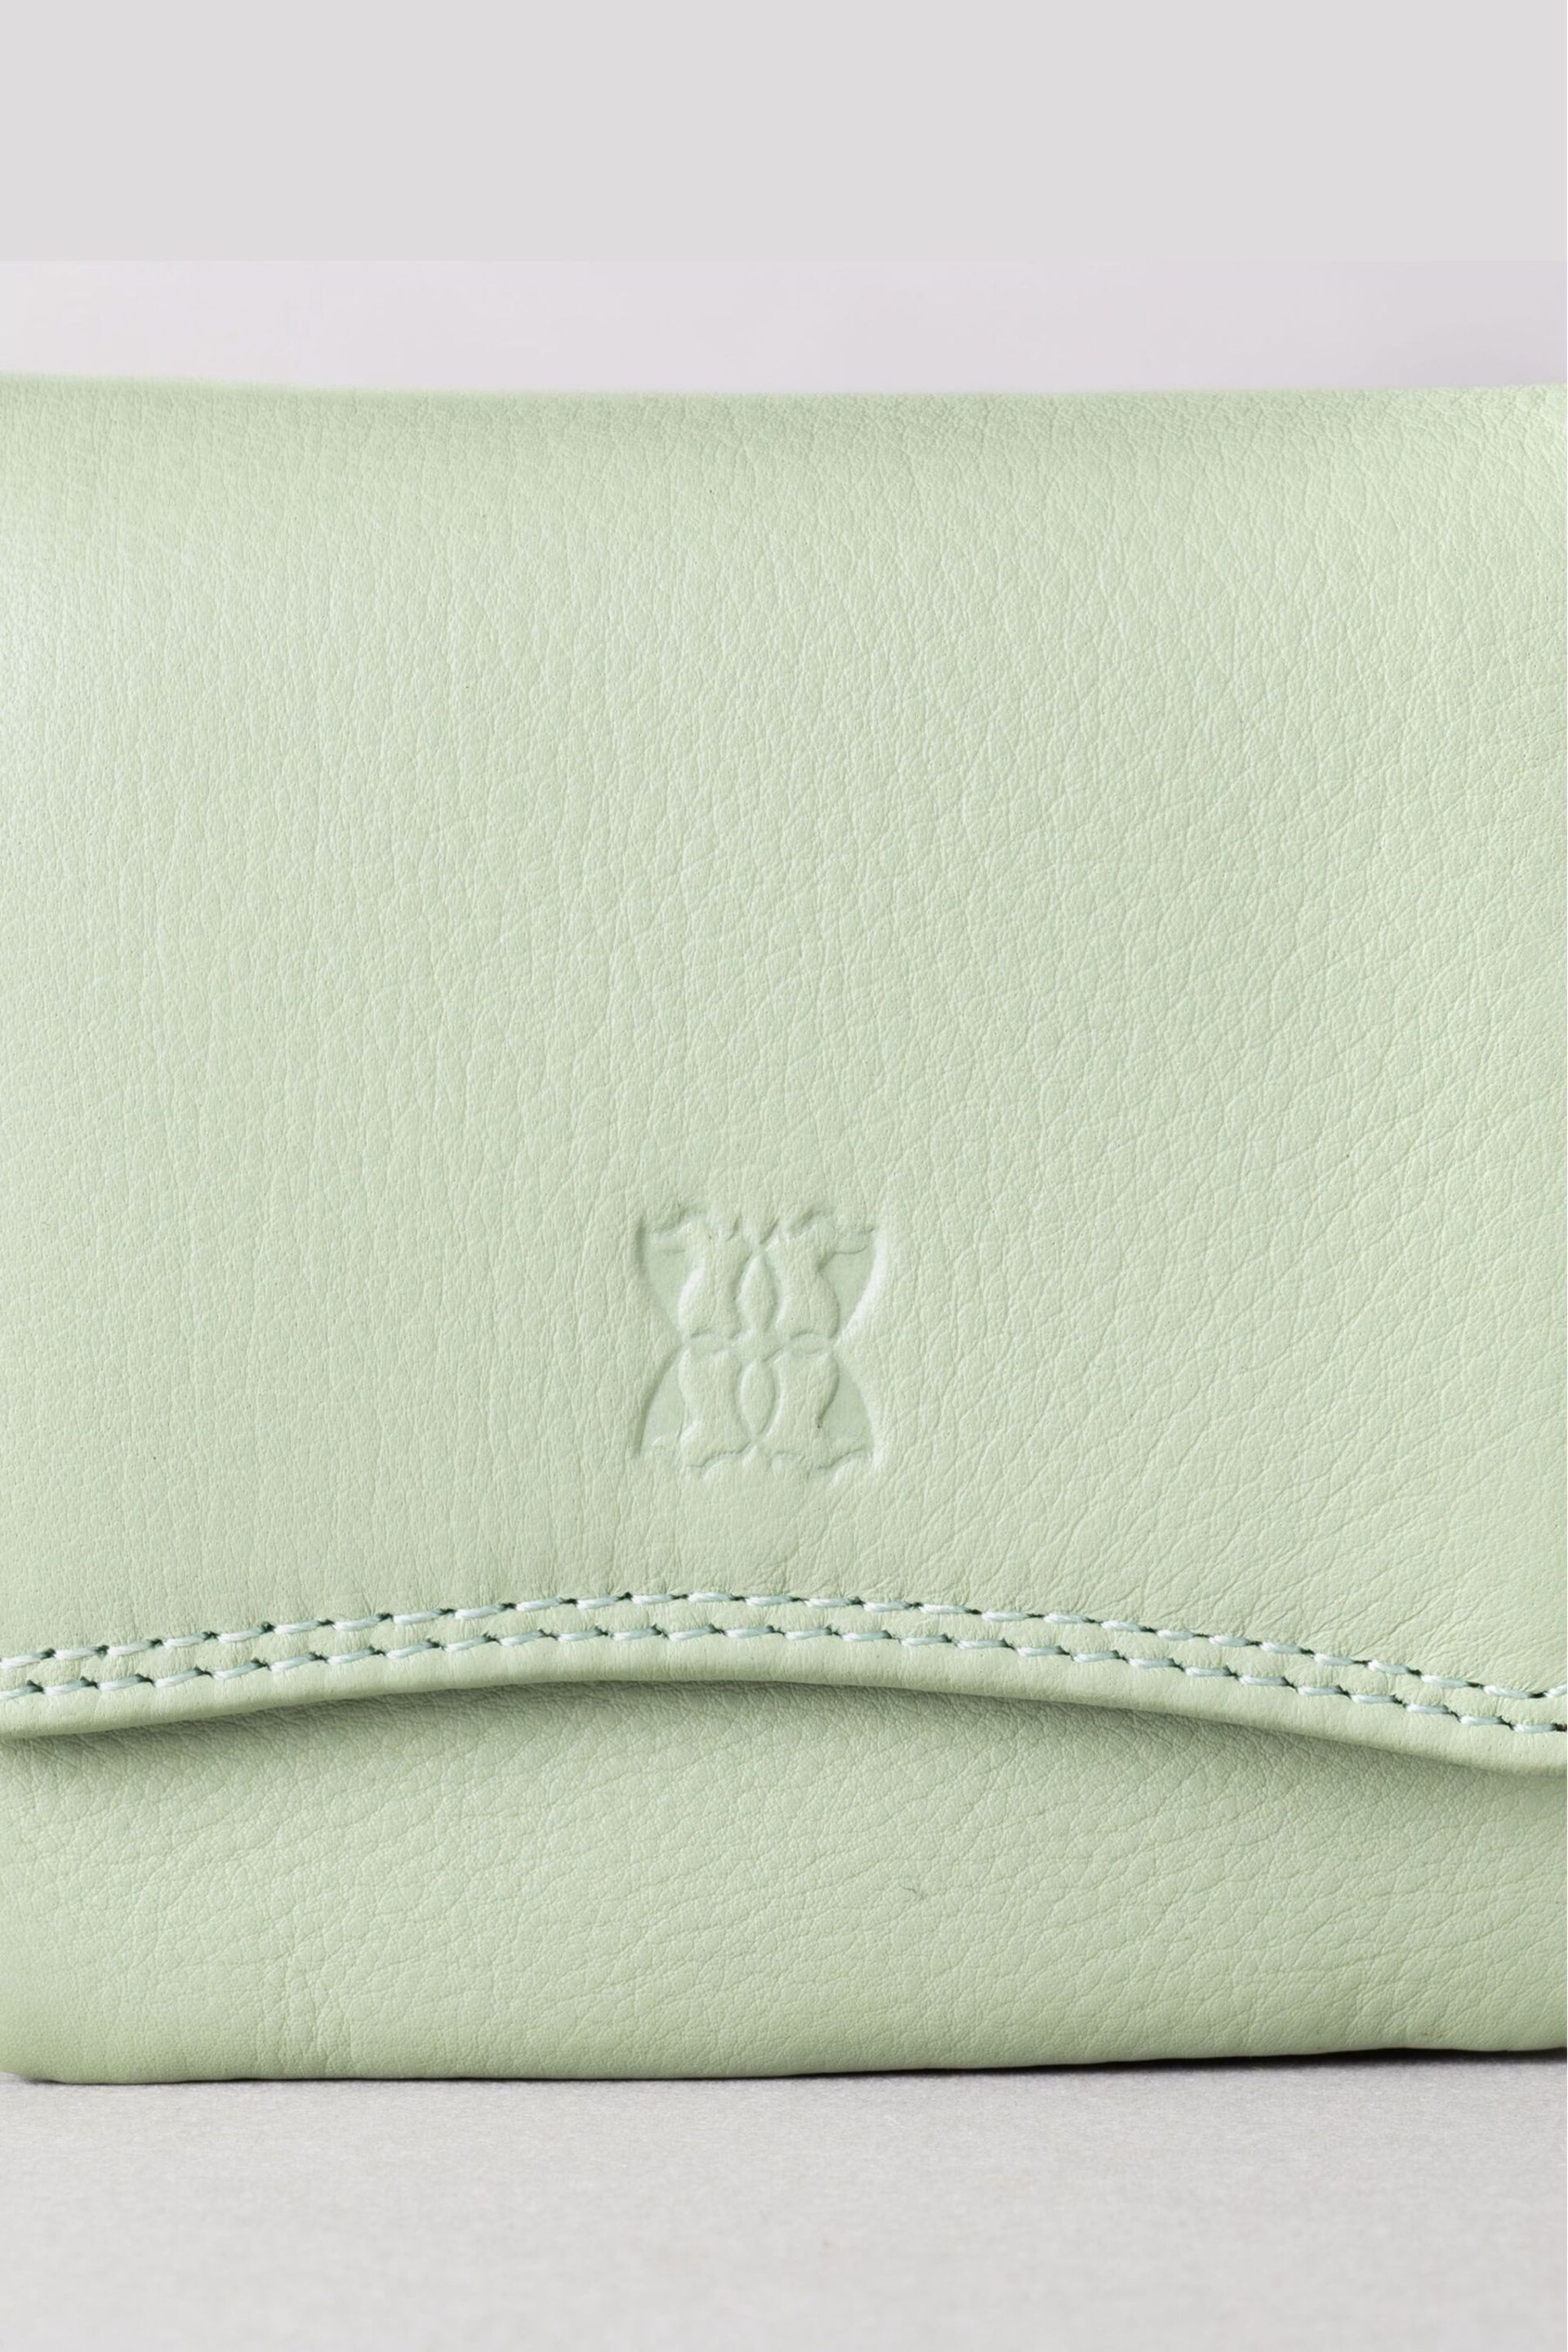 Lakeland Leather Green Small Leather Flapover Purse - Image 4 of 4